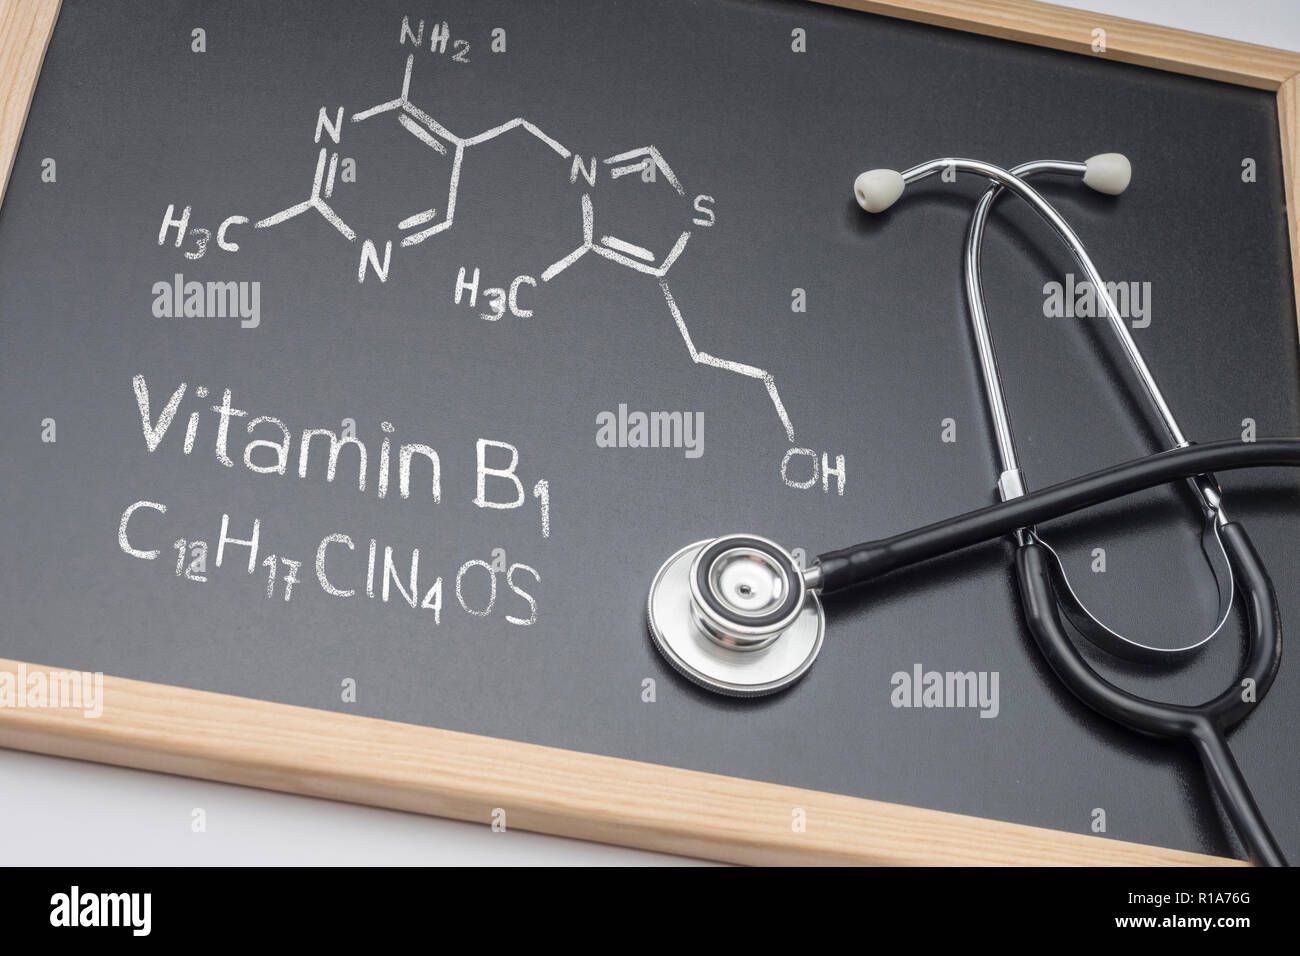 Chemical formula of vitamin B1 drawn on a whiteboard together with a stethoscope, conceptual image Stock Photo